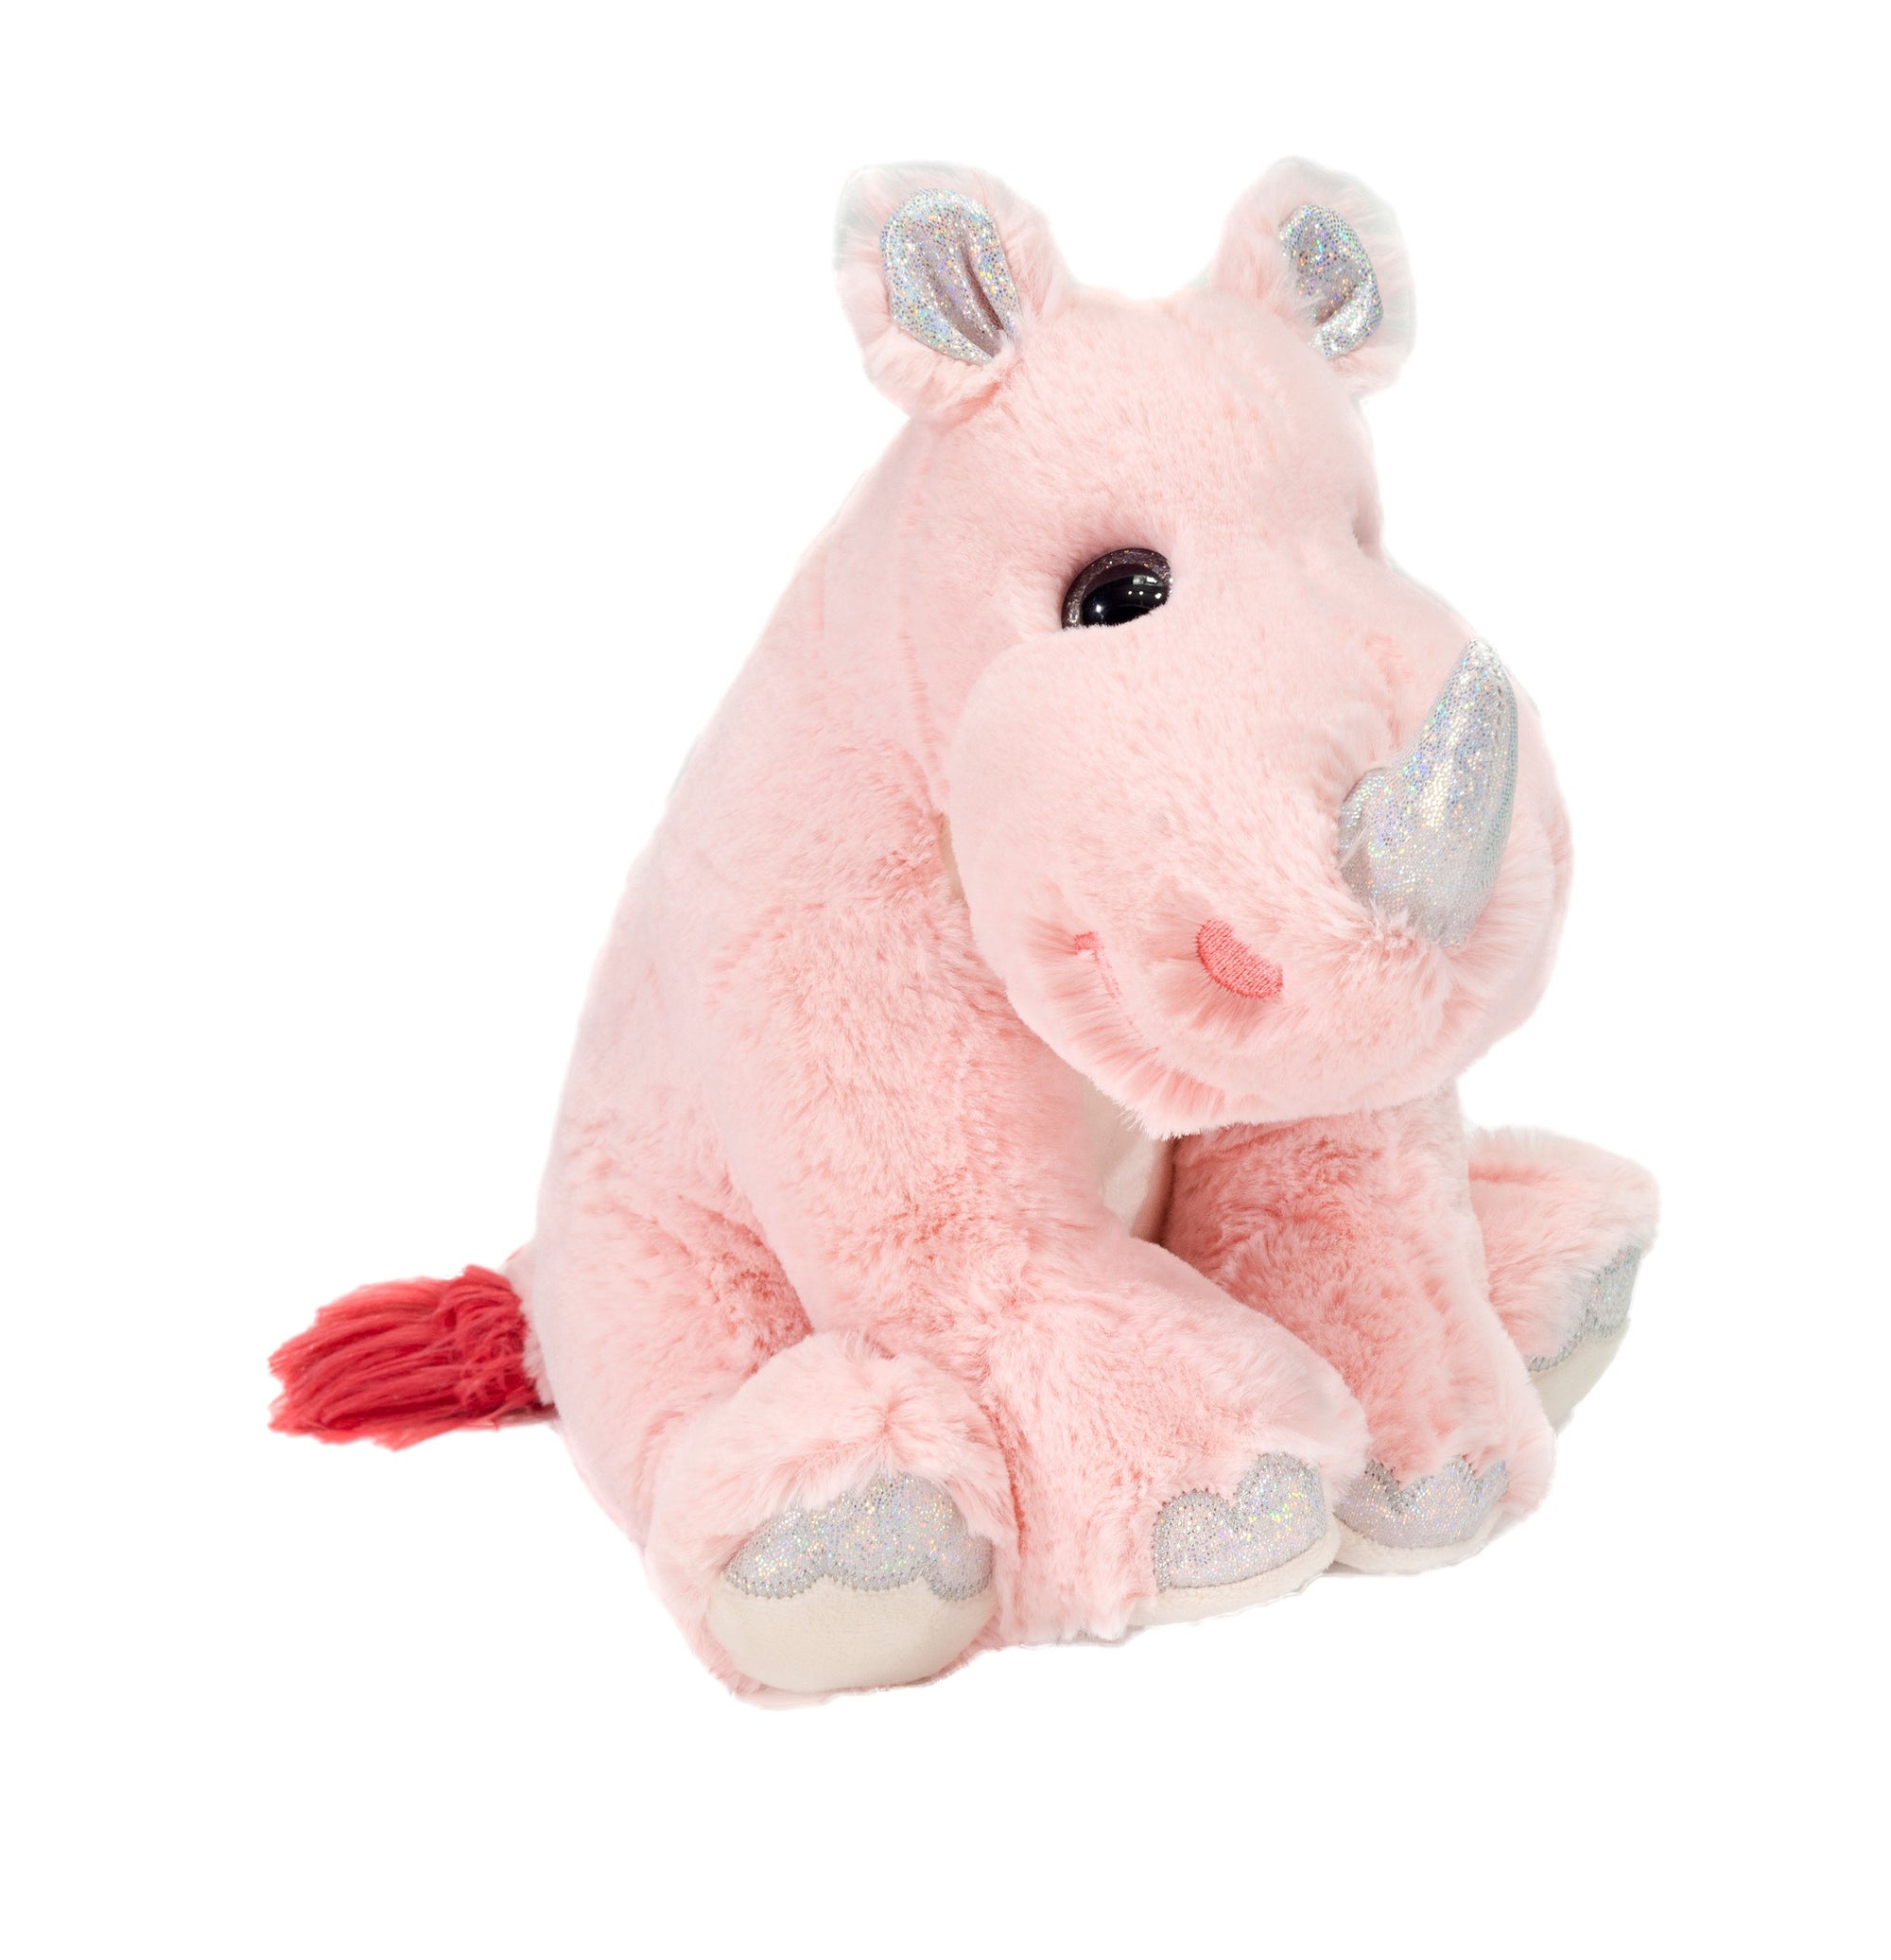 COTTON CANDY CUTIES - 10IN RHINOS PINK OR TURQUOISE